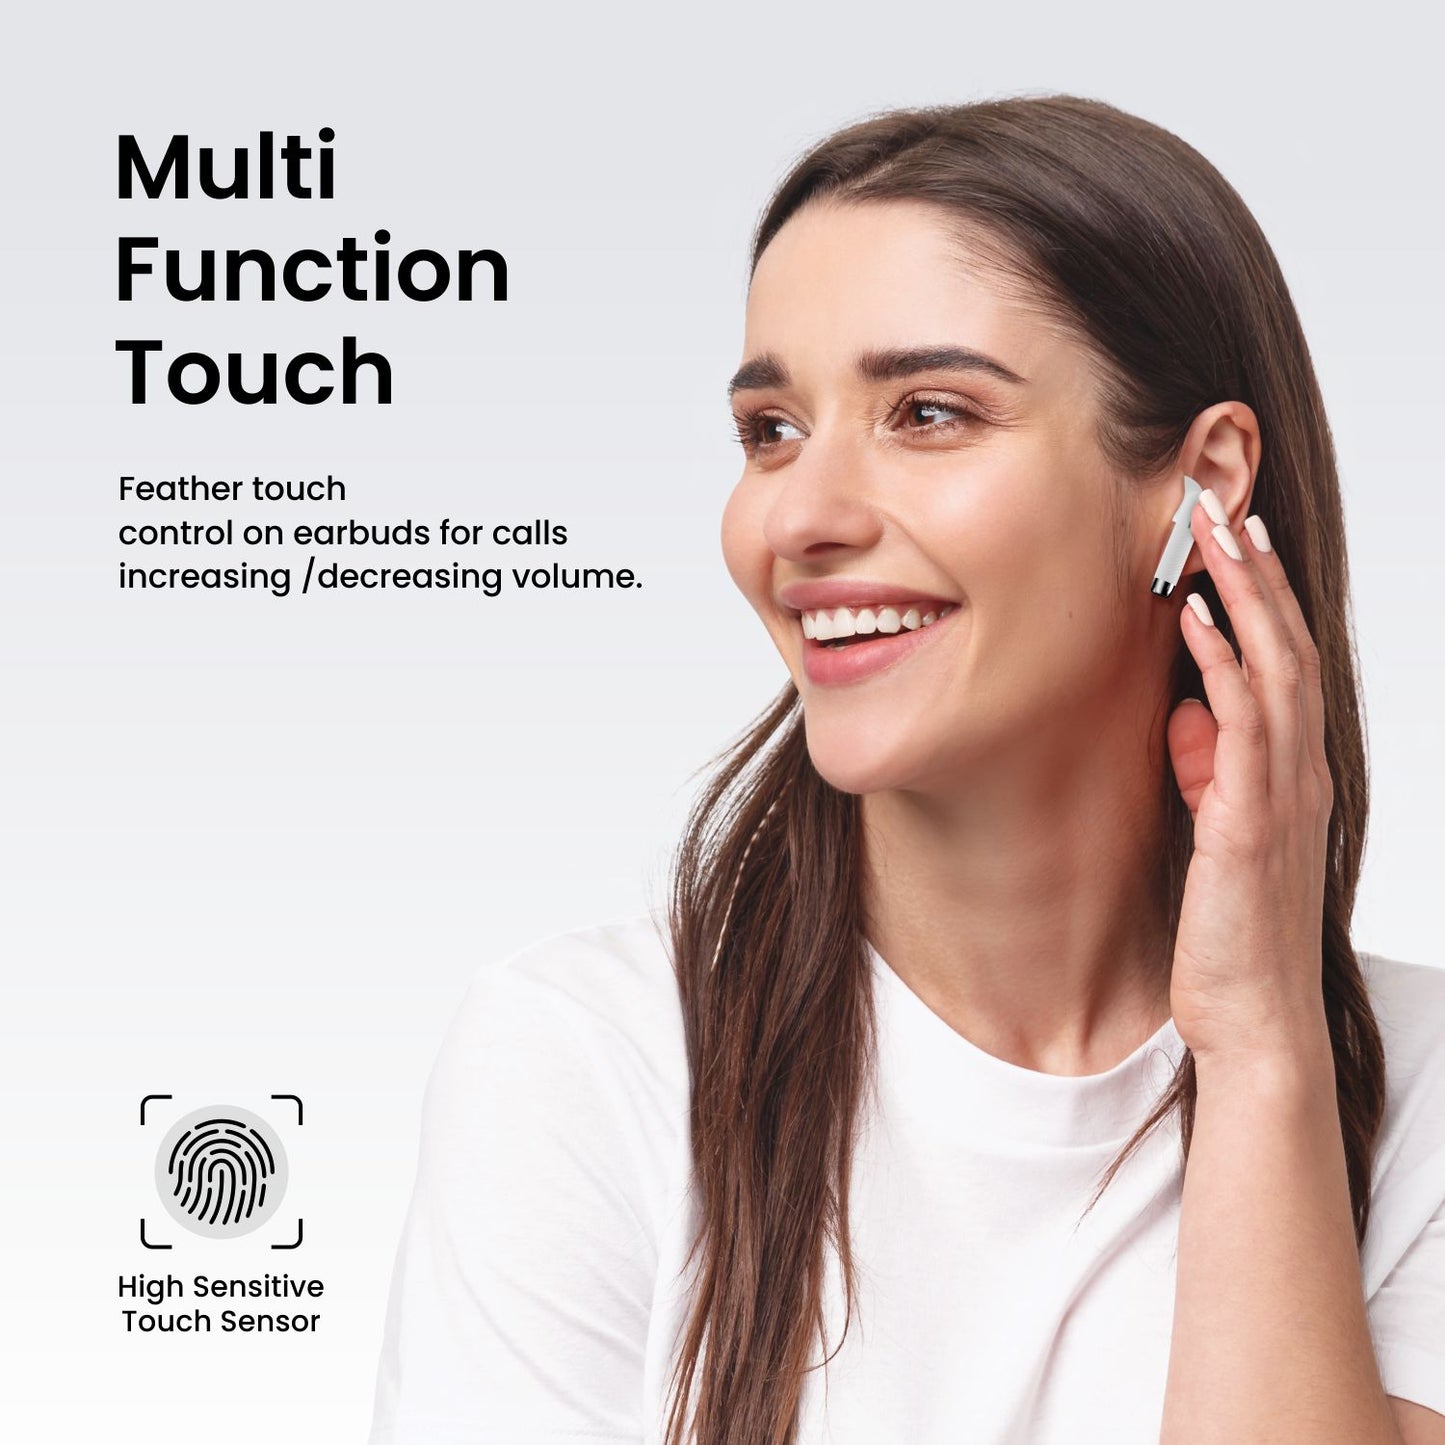 White Portronics Harmonics Twins S8 Best tws bluetooth earbuds comes with multi touch function